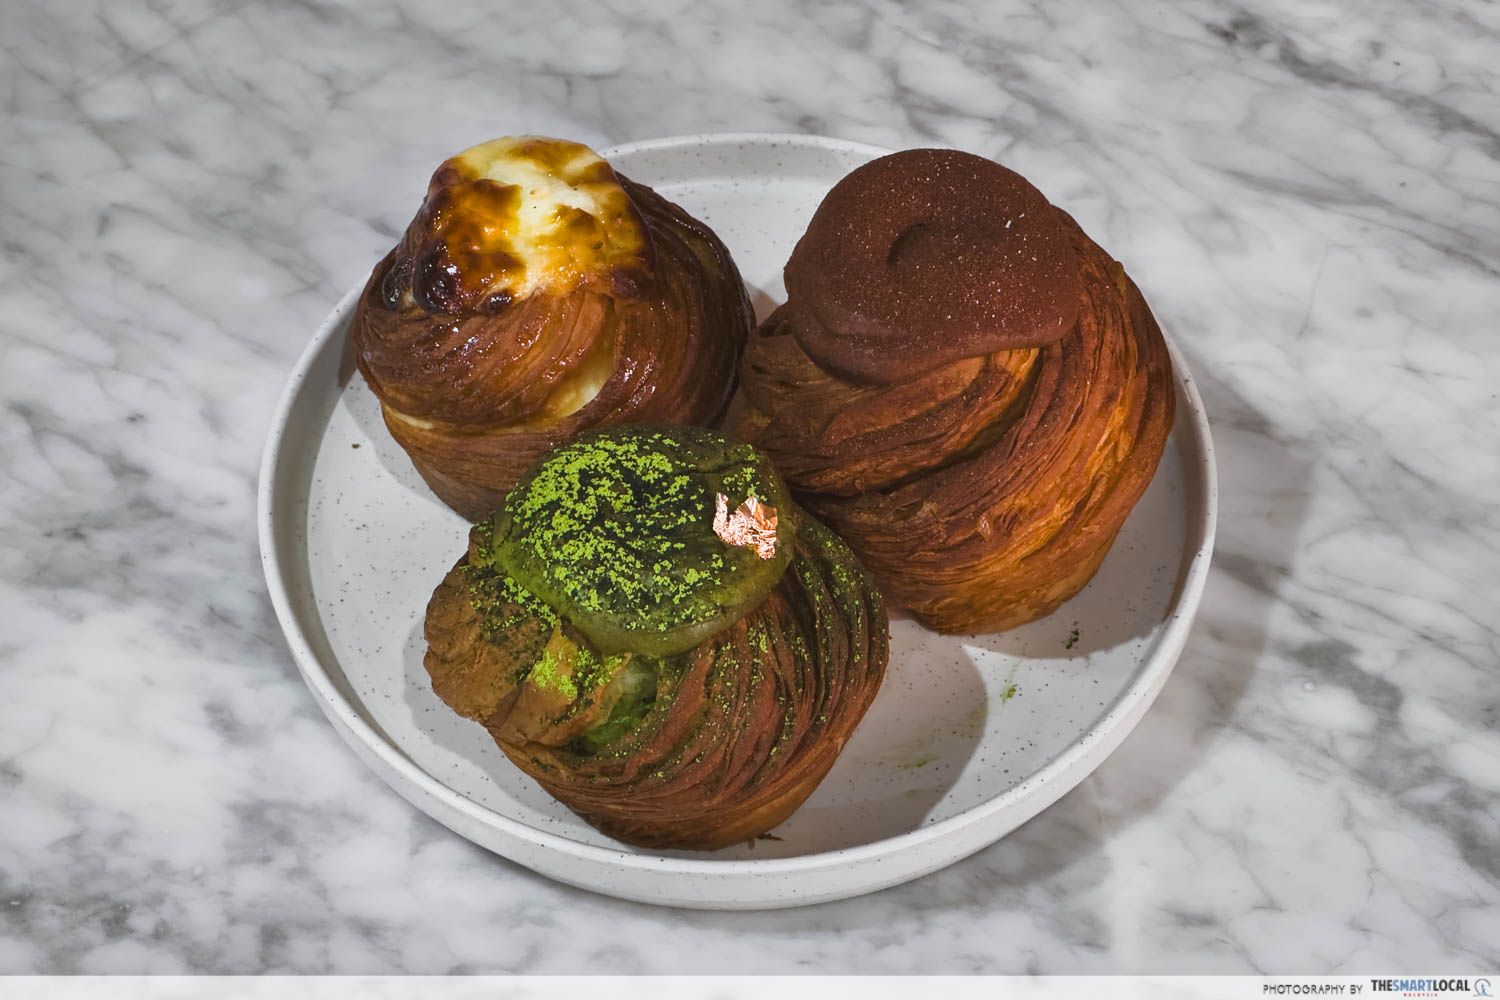 original yoghurt cheese, matcha, and chocolate cup-like croissants on a plate